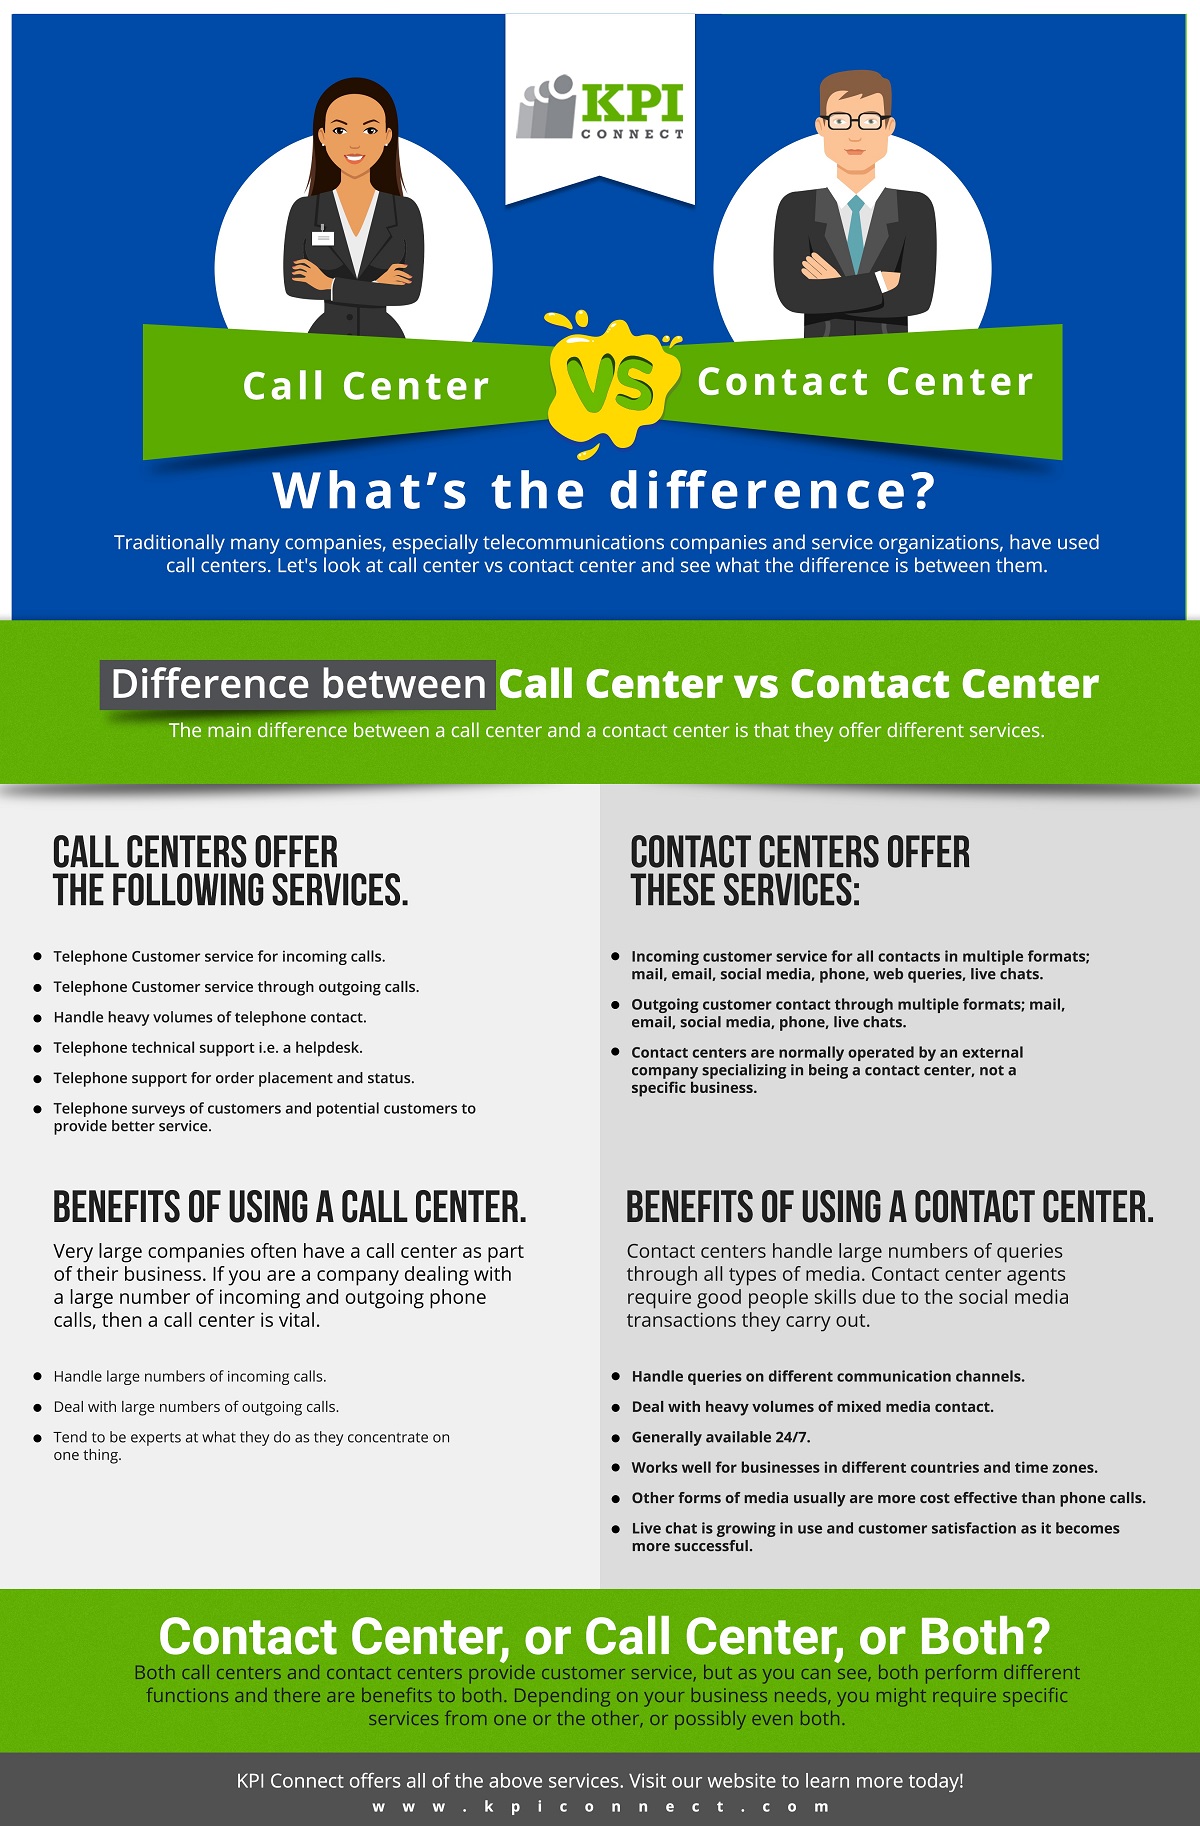 Call Center vs Contact Center. What’s the difference? 